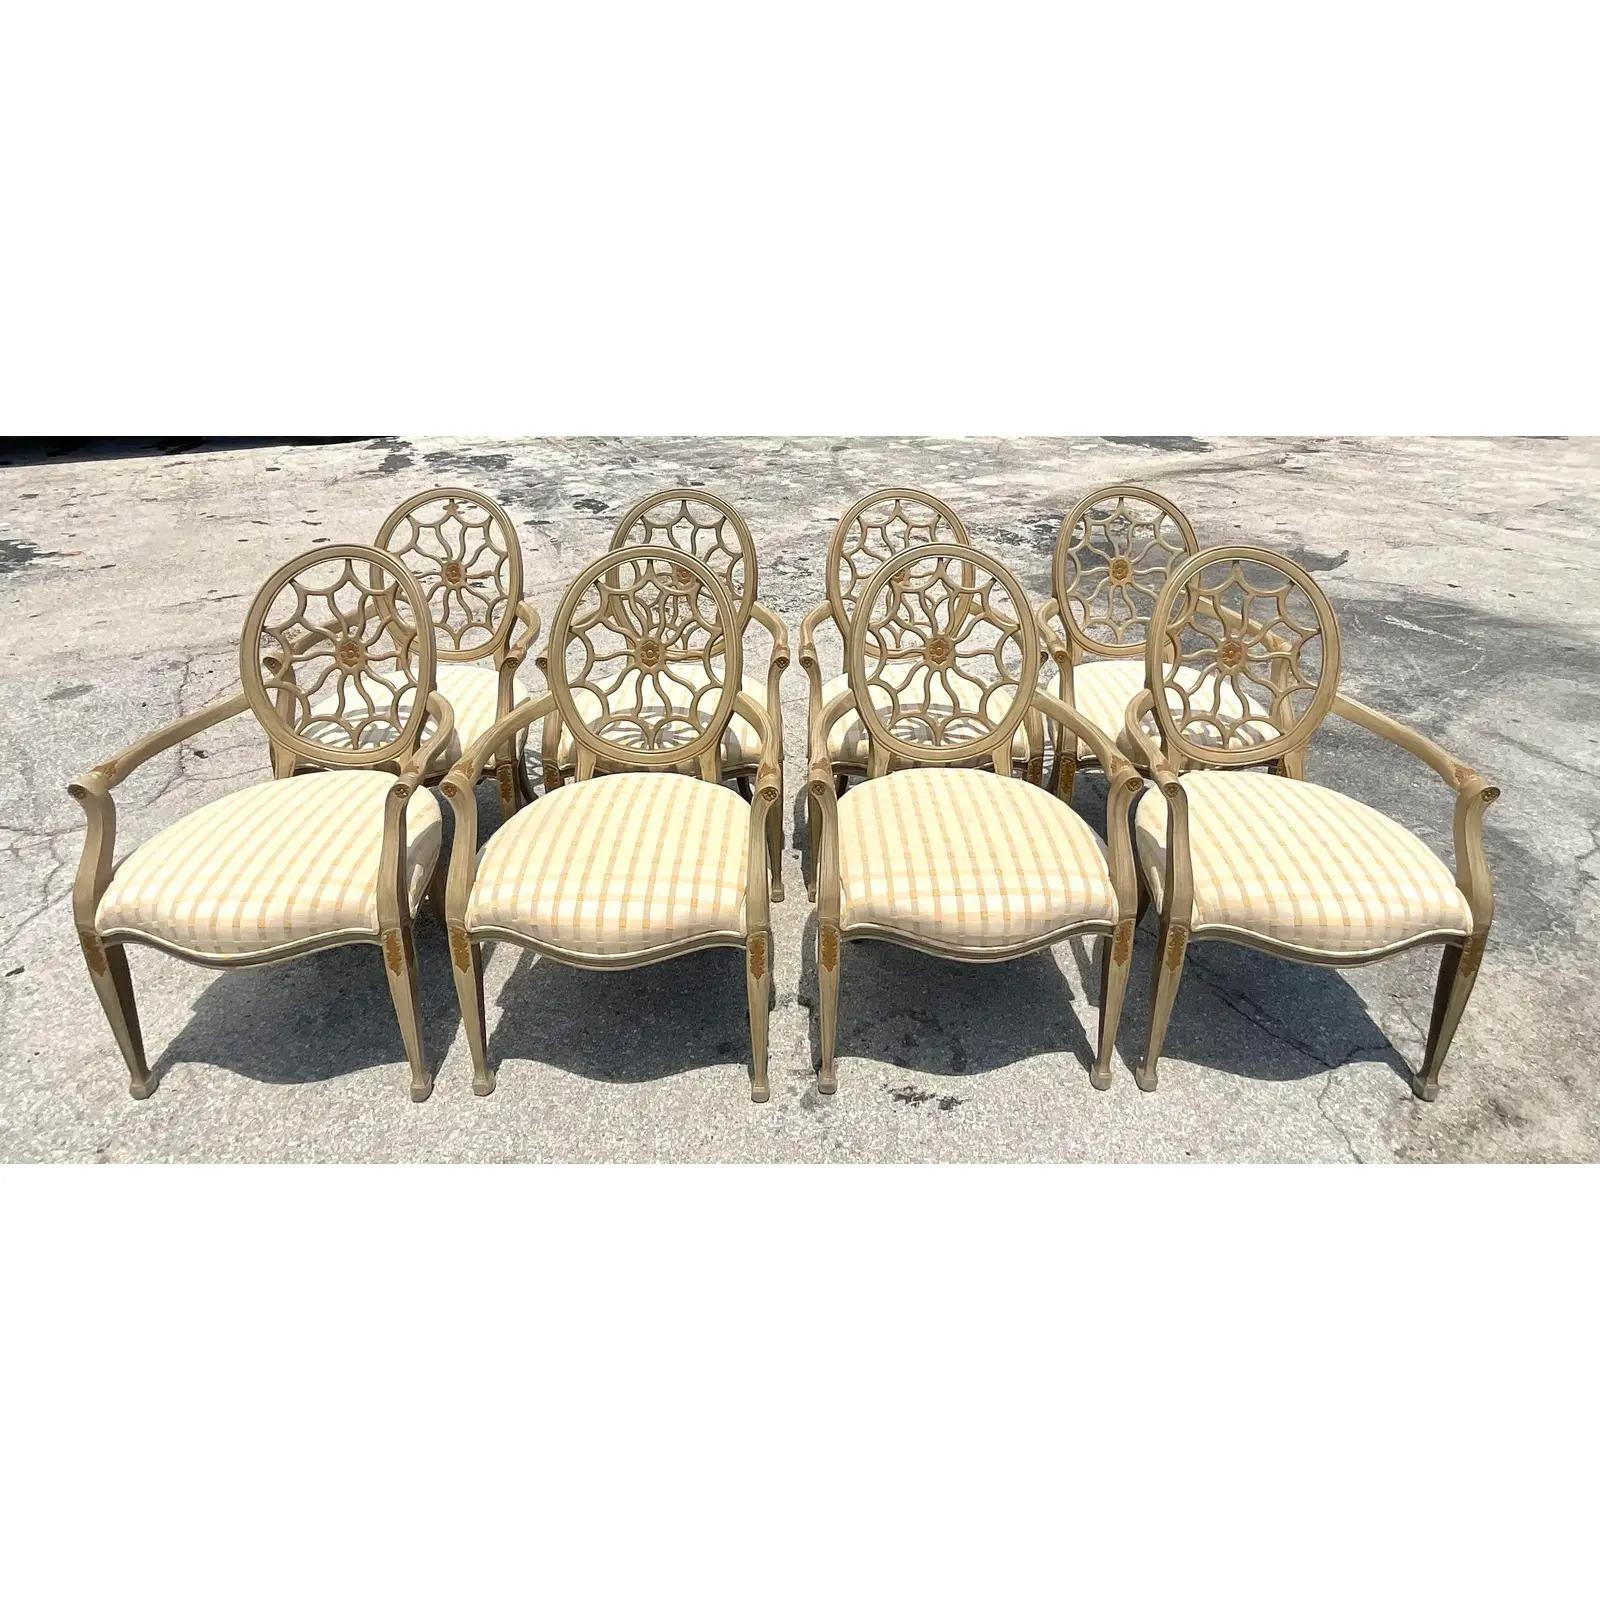 Gorgeous set of 8 vintage Regency dining chairs. Beautiful spider back design with chic striped upholstery. A gorgeous addition to any room. Acquired from a Palm Beach estate.